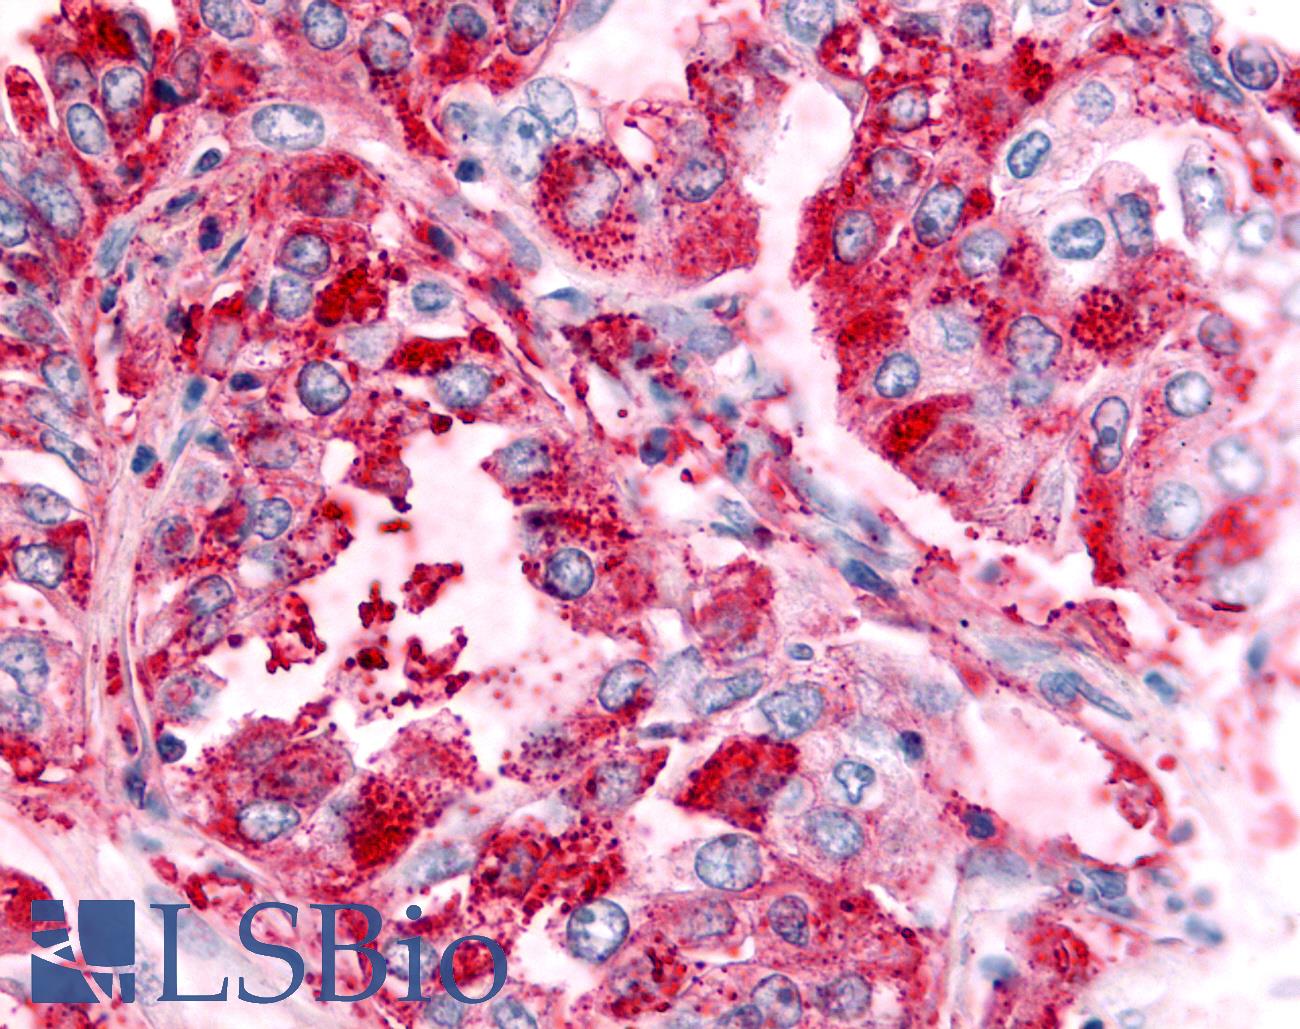 GPR151 Antibody - Anti-GPR151 antibody IHC of human Lung, Non-Small Cell Carcinoma. Immunohistochemistry of formalin-fixed, paraffin-embedded tissue after heat-induced antigen retrieval.